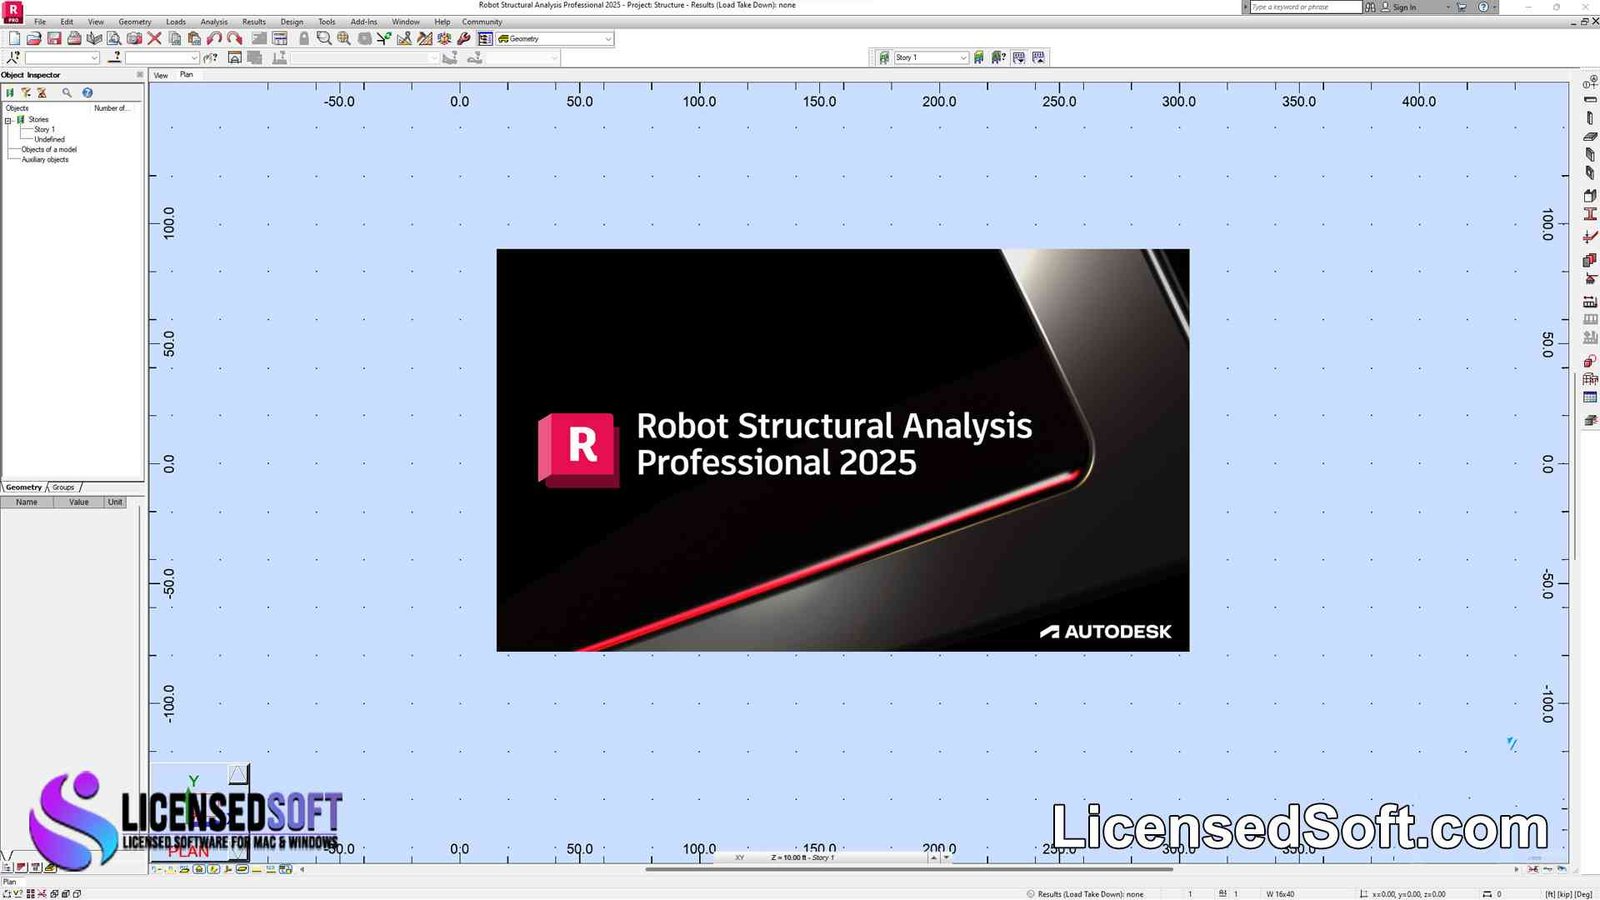 Autodesk Robot Structural Analysis Professional 2025 By LicensedSoft